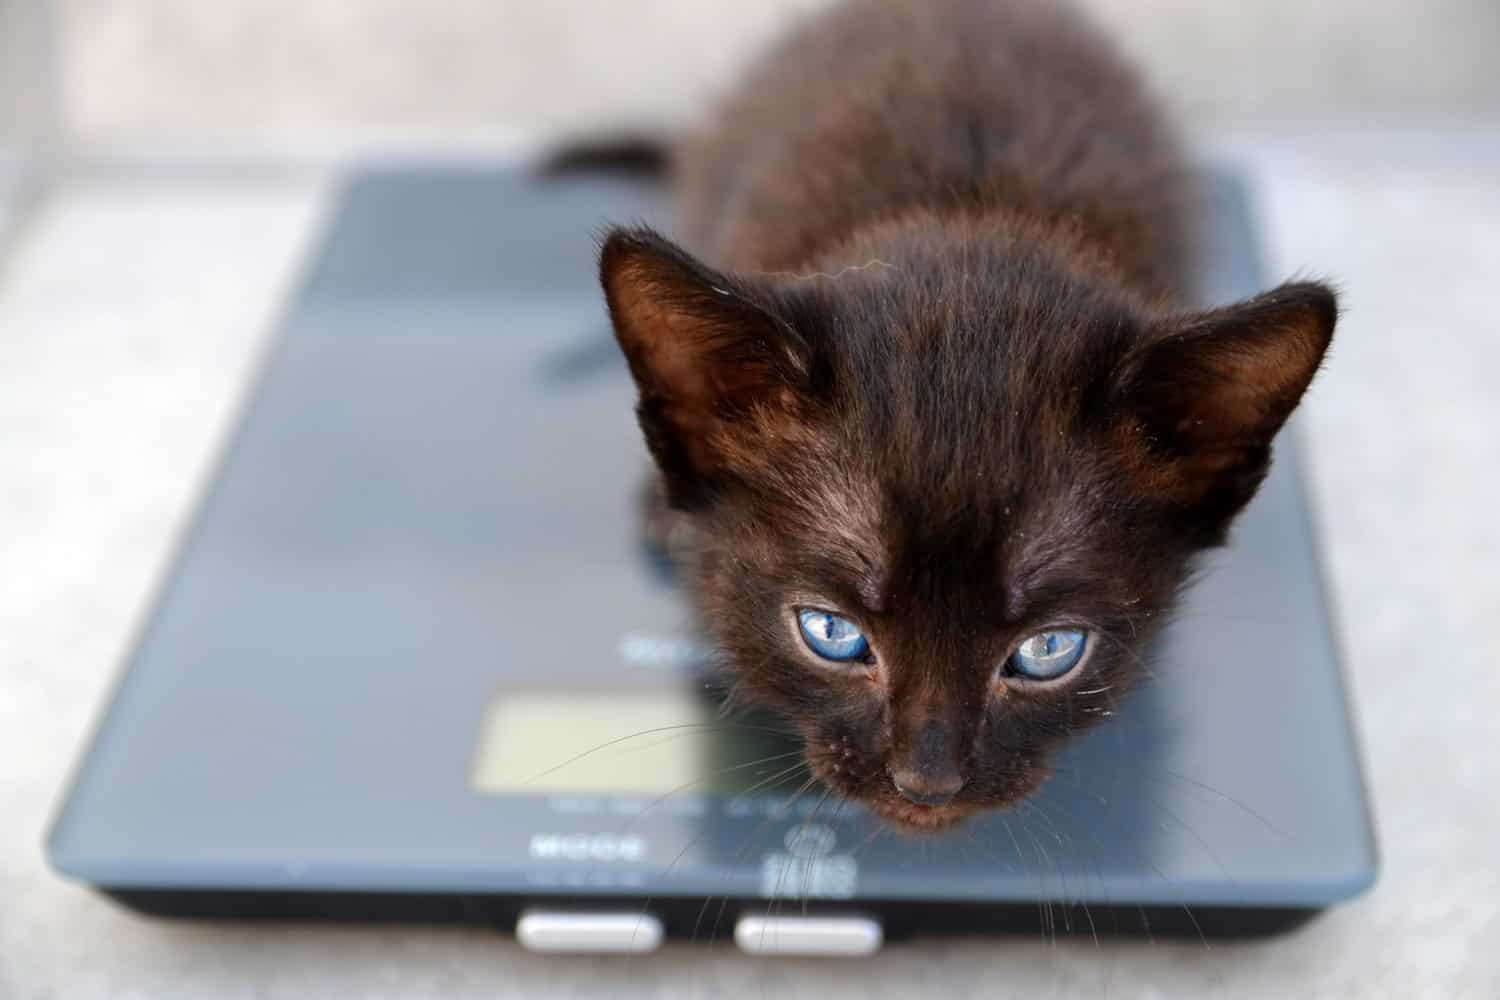 Cute fluffy black kitten is weighed on scale.Vet medicine for animals, pets health care concept.